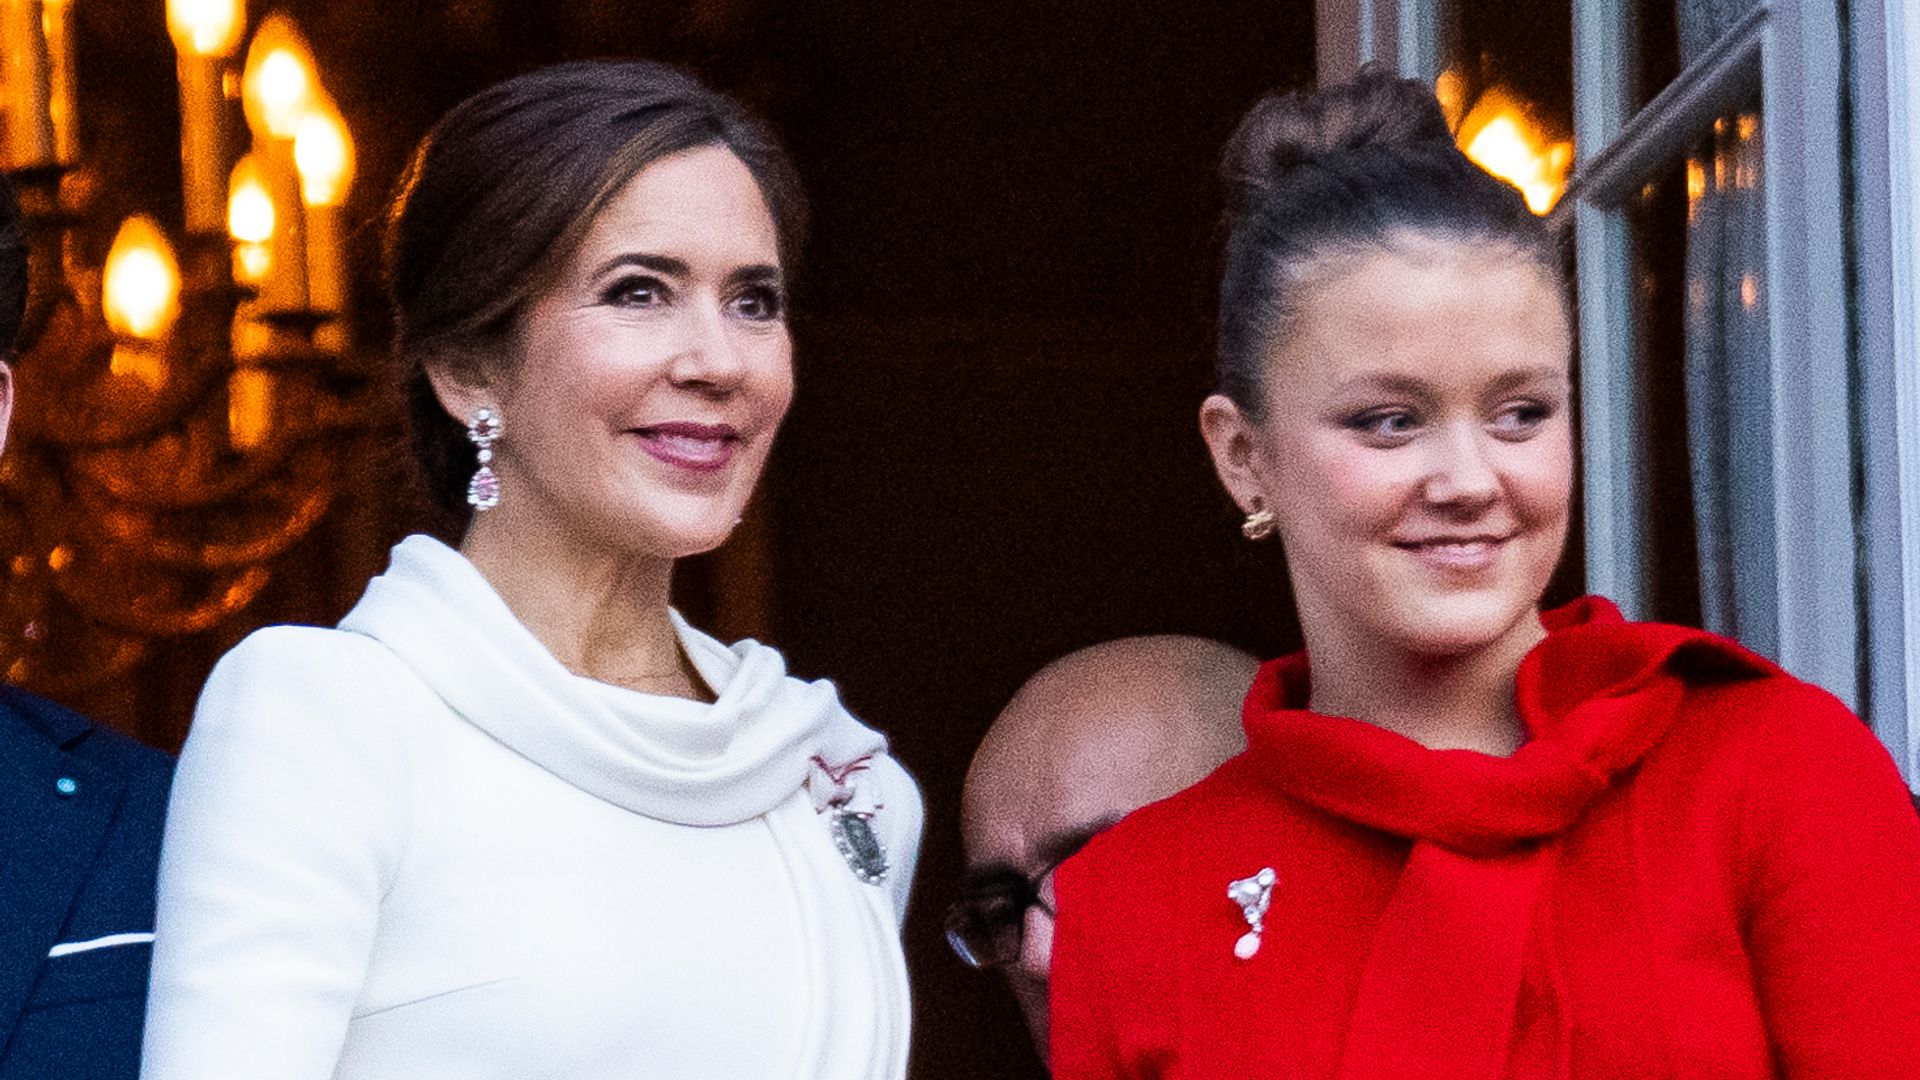 Queen Mary laughs off awkward moment with Princess Isabella - watch ...